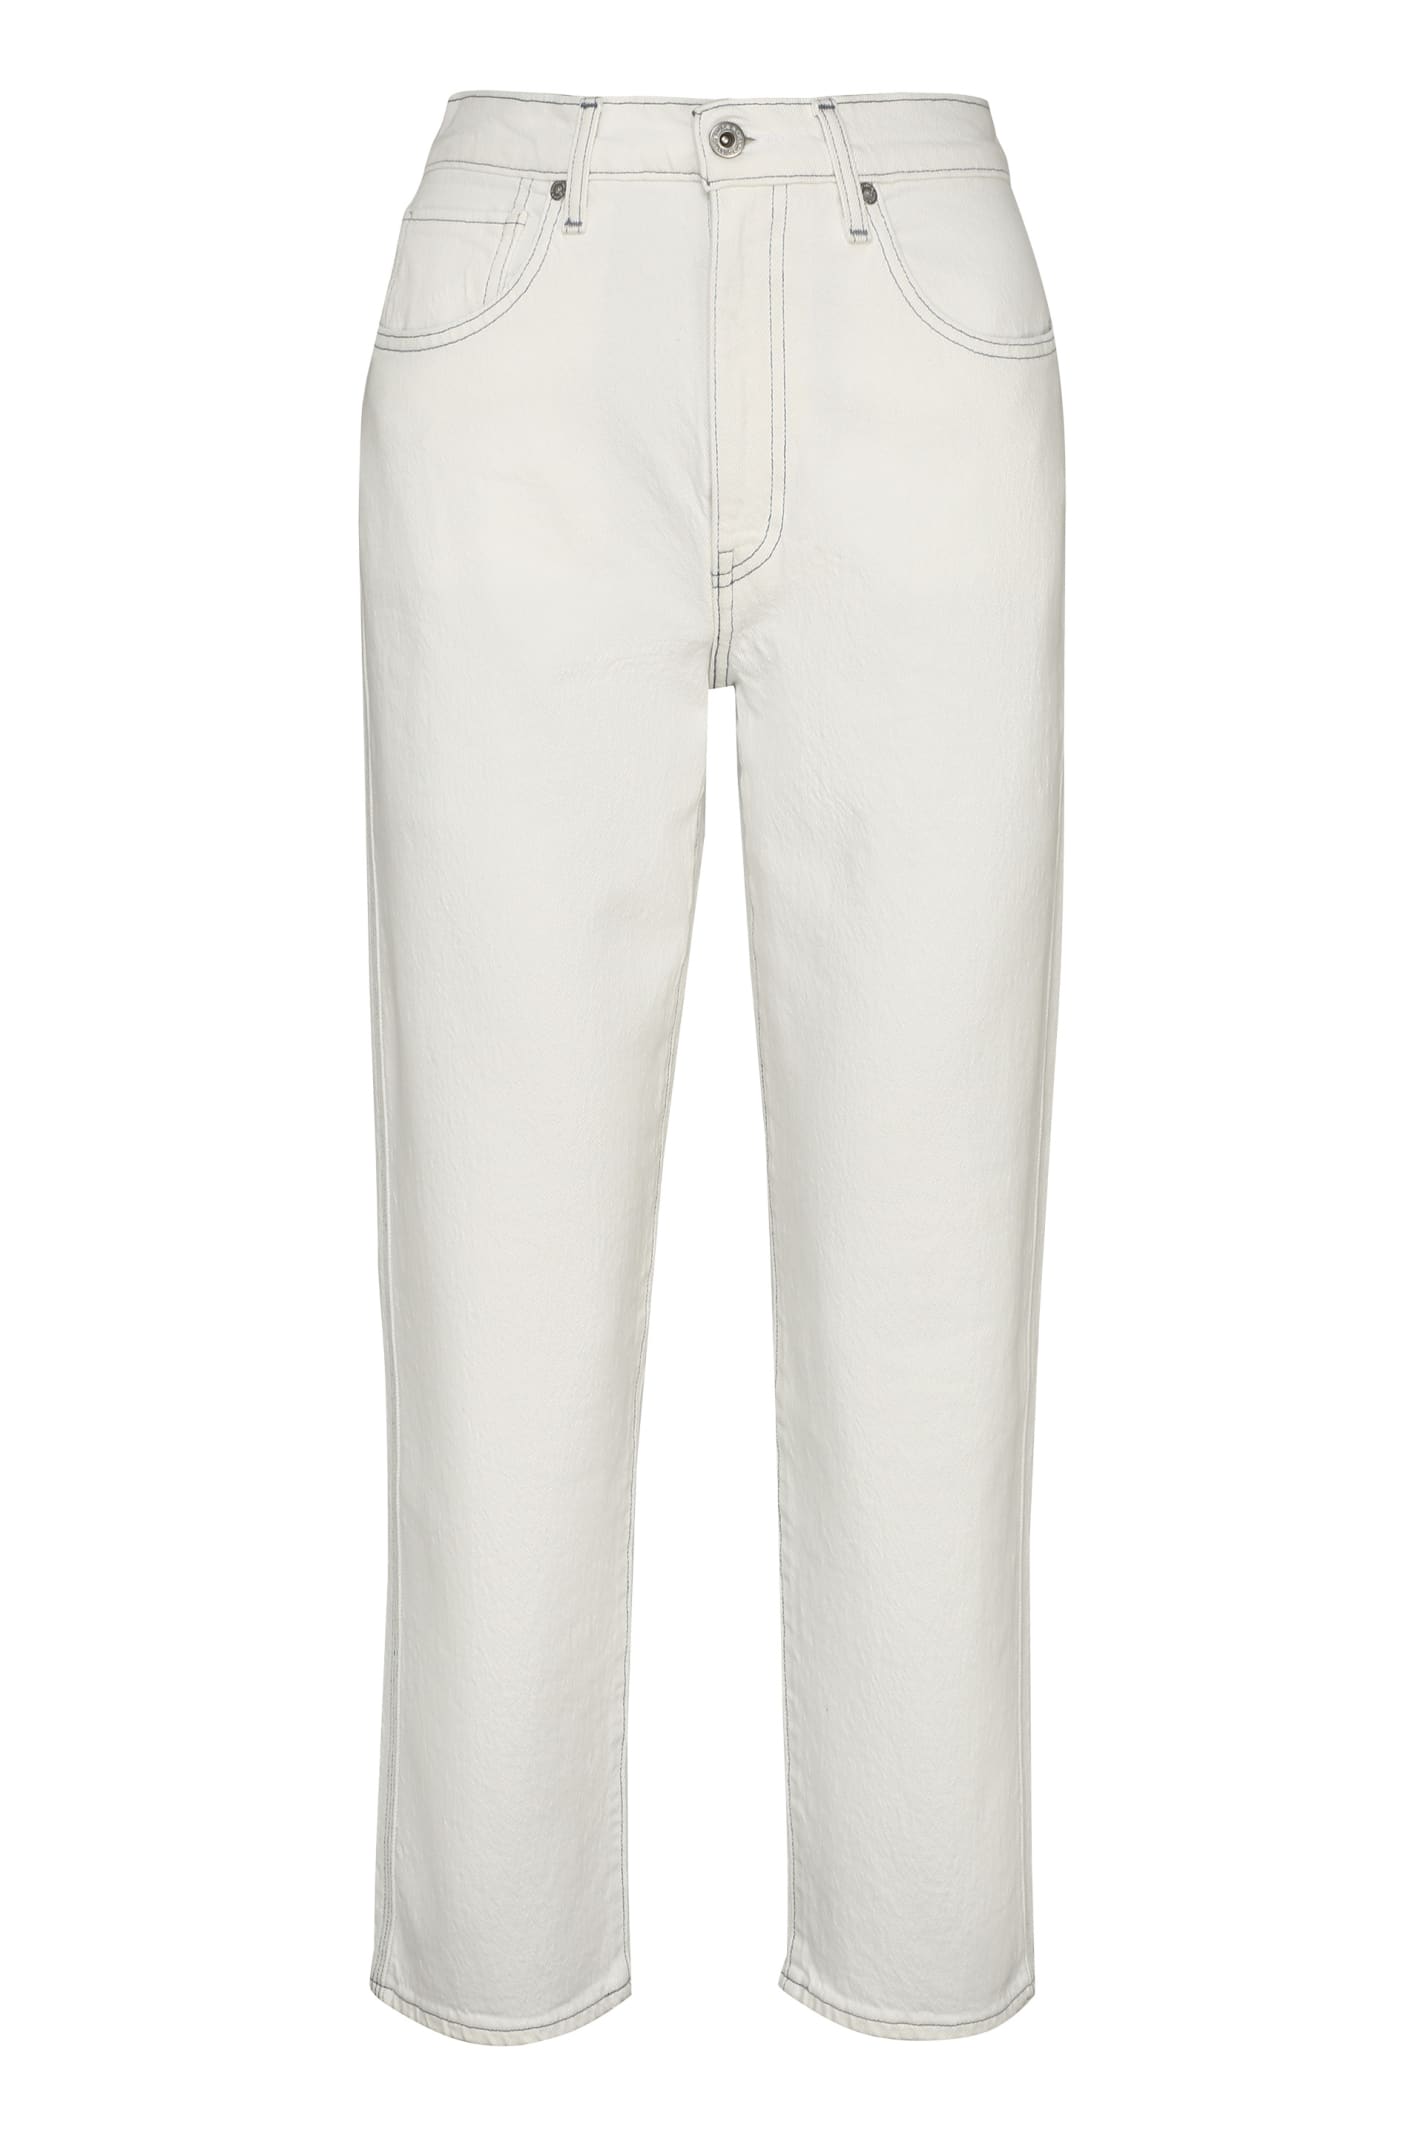 Levi's The Column Tapered Fit Jeans In White